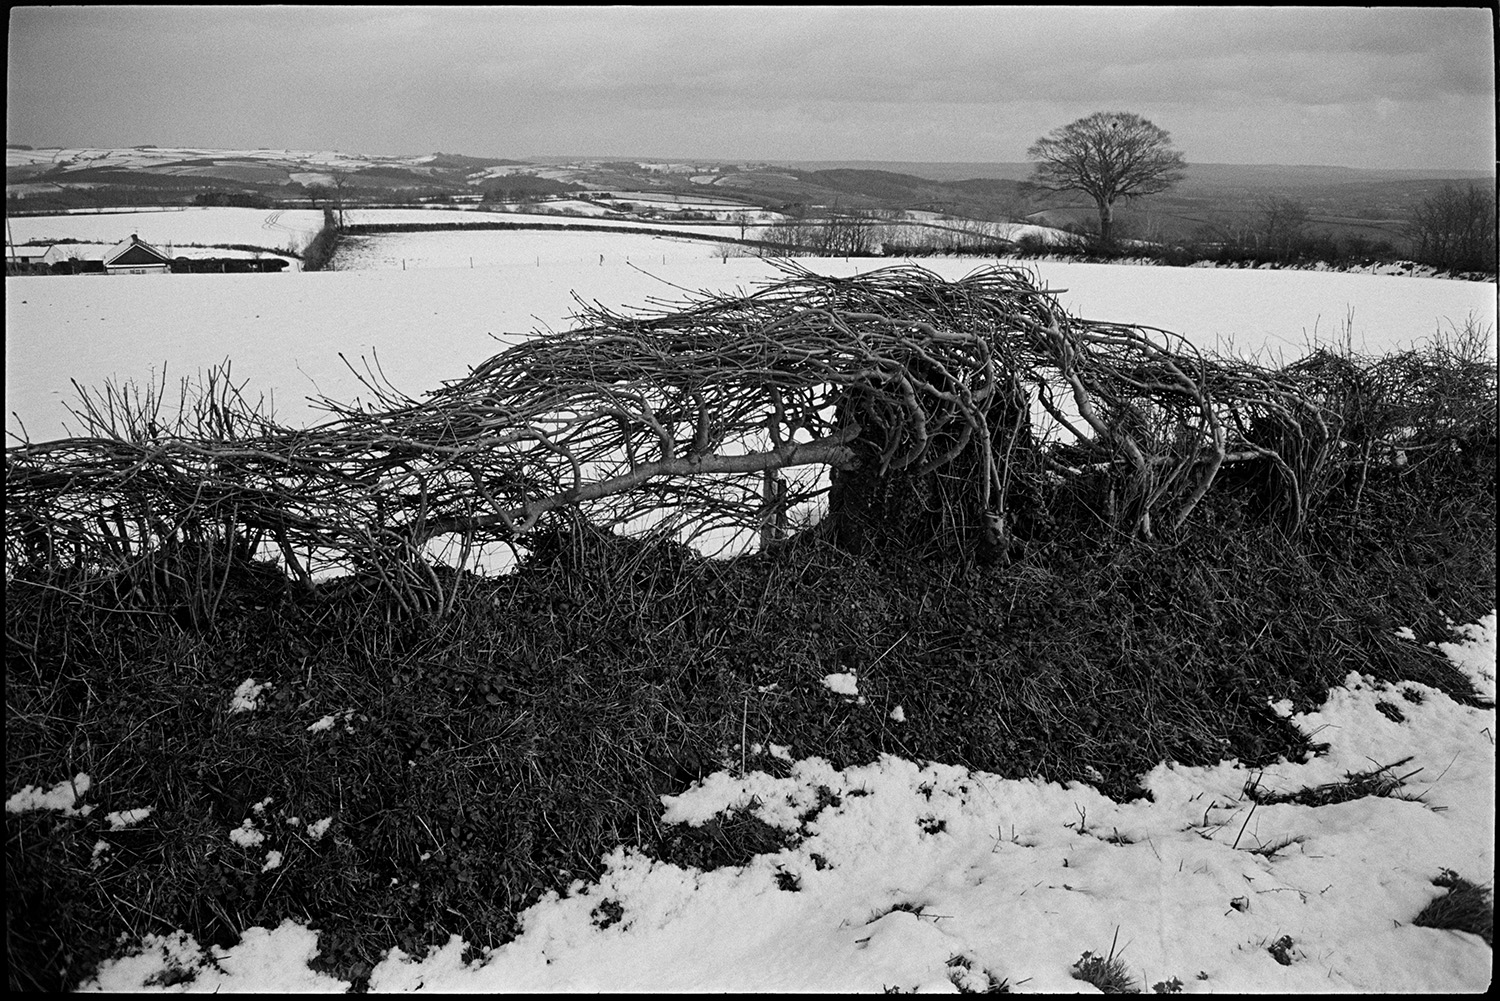 Snow, hedge laid like basket against snowy fields. 
[A laid hedge surrounded by a landscape of snow covered fields and trees near Knowstone, Exmoor. A farm can be seen in the background.]